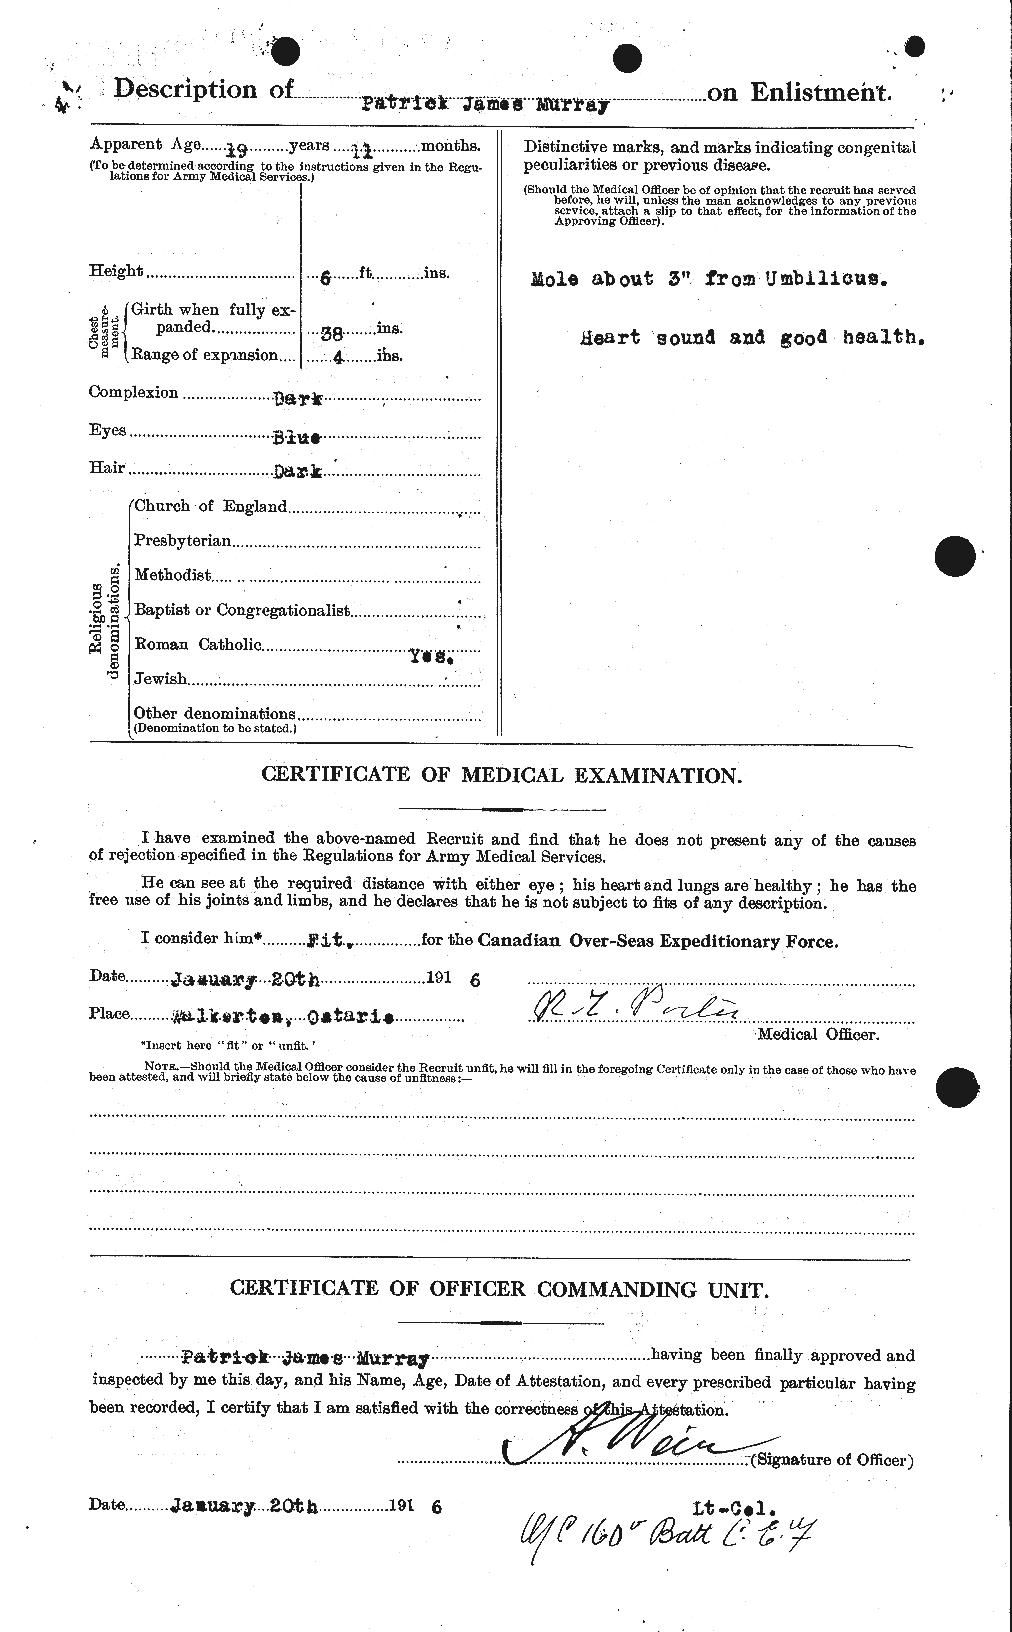 Personnel Records of the First World War - CEF 514004b